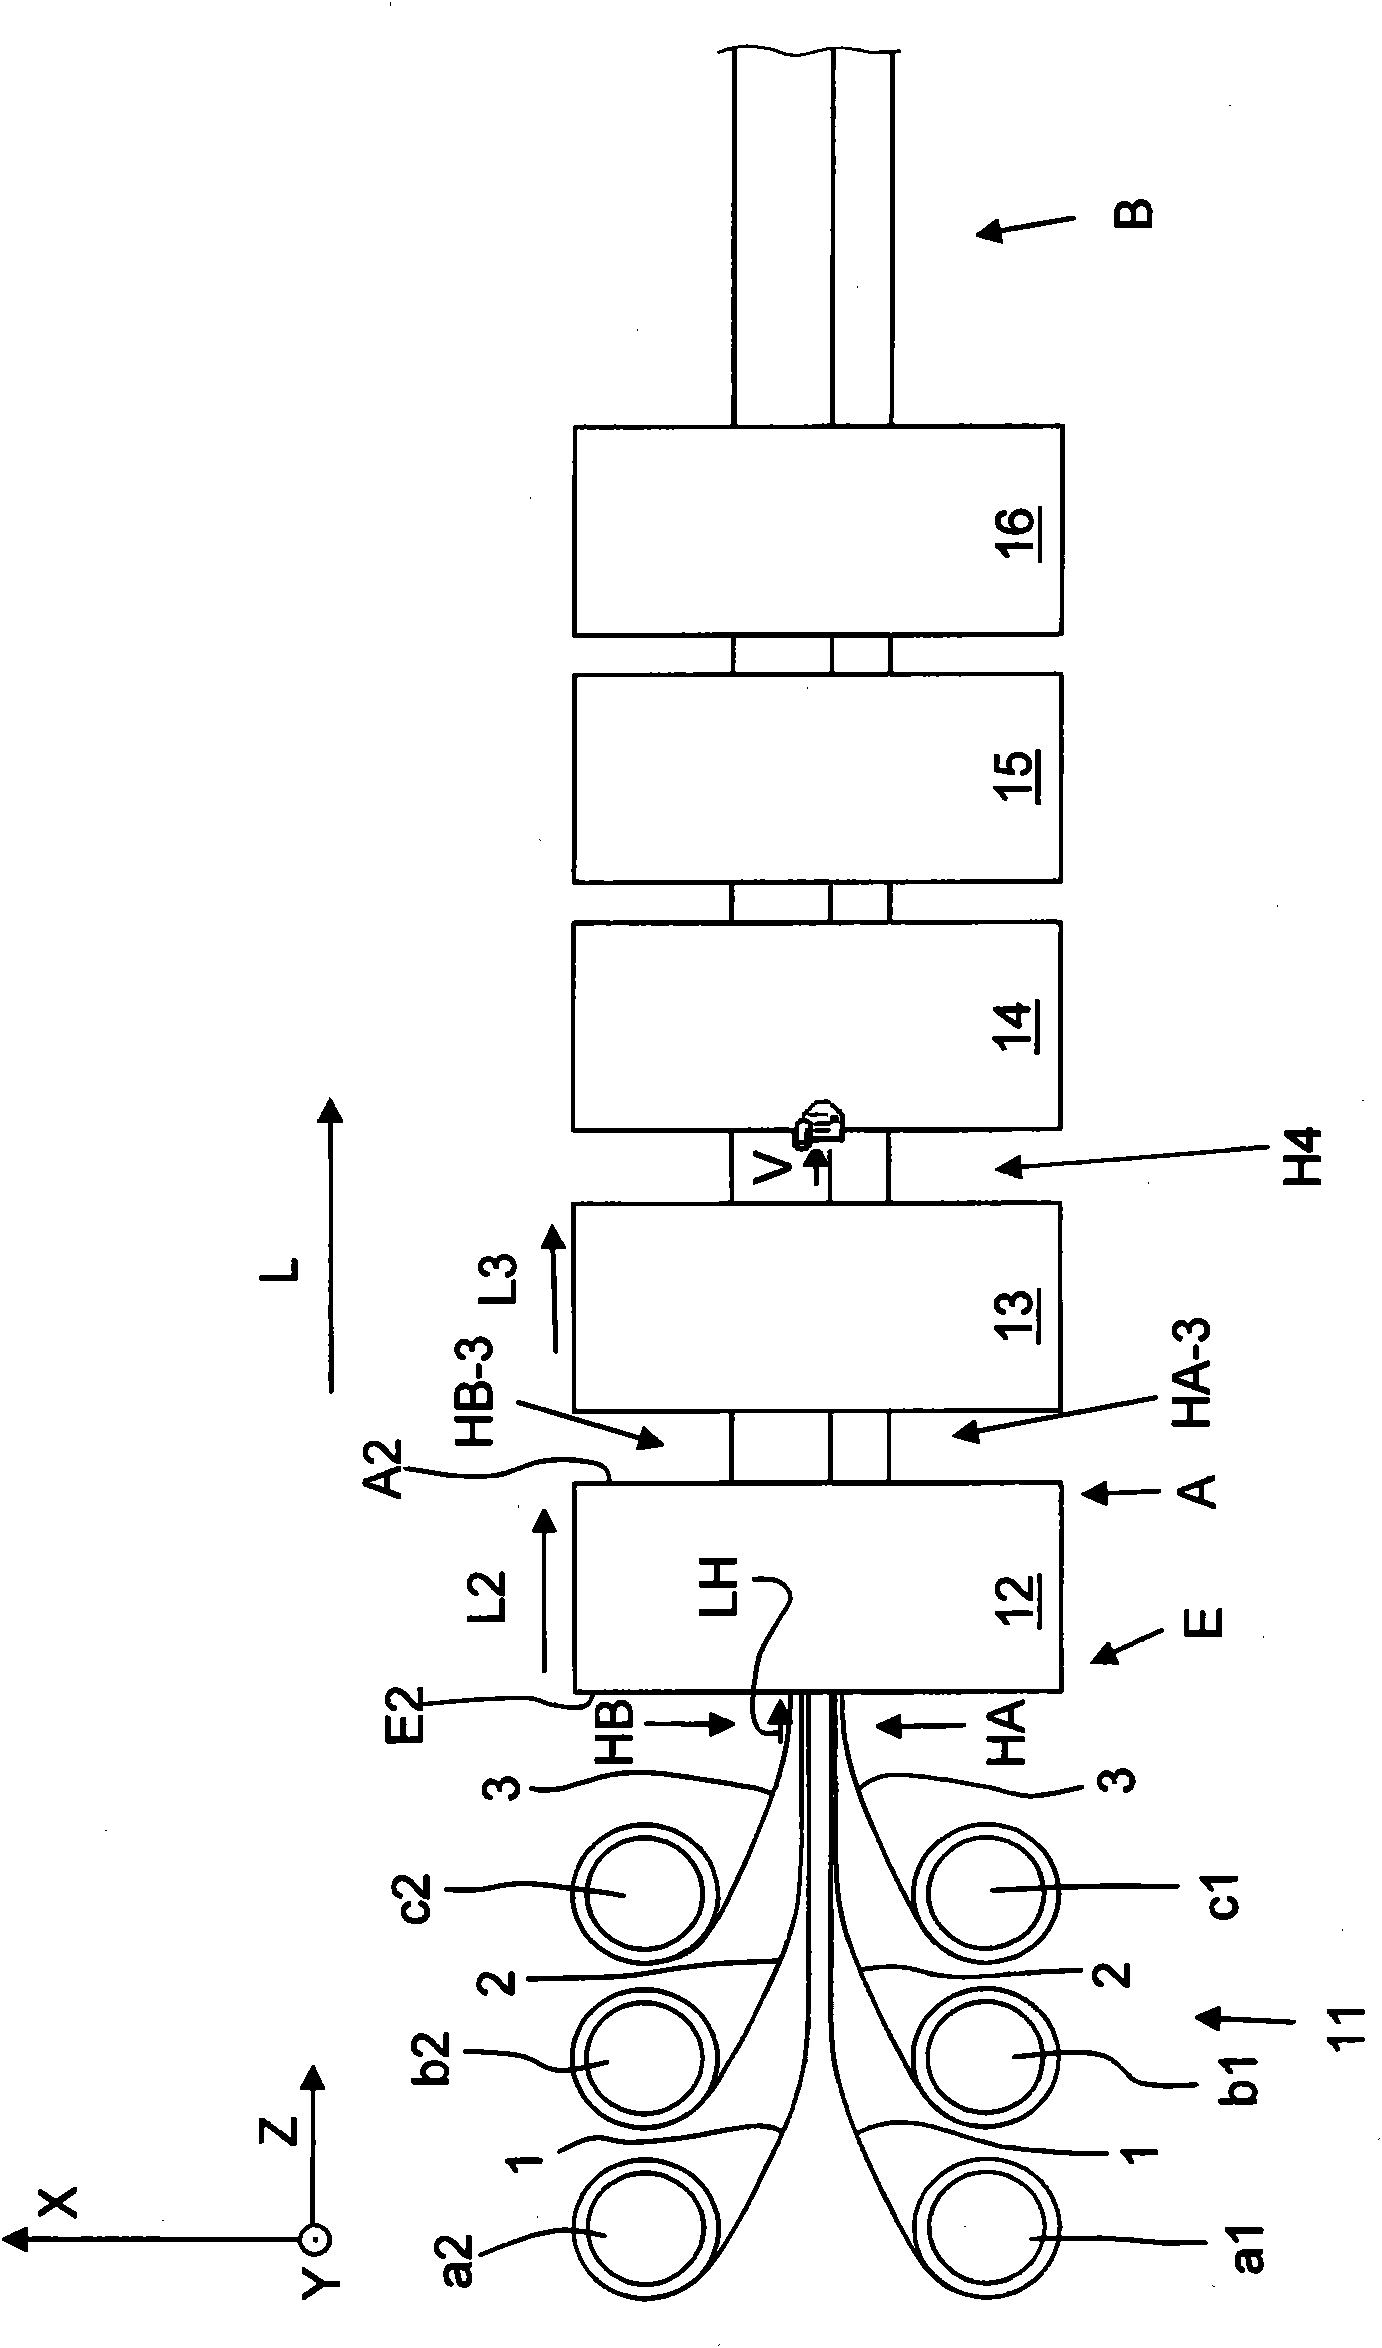 Method for the production of a profiled preform or a profiled fiber composite-plastic component